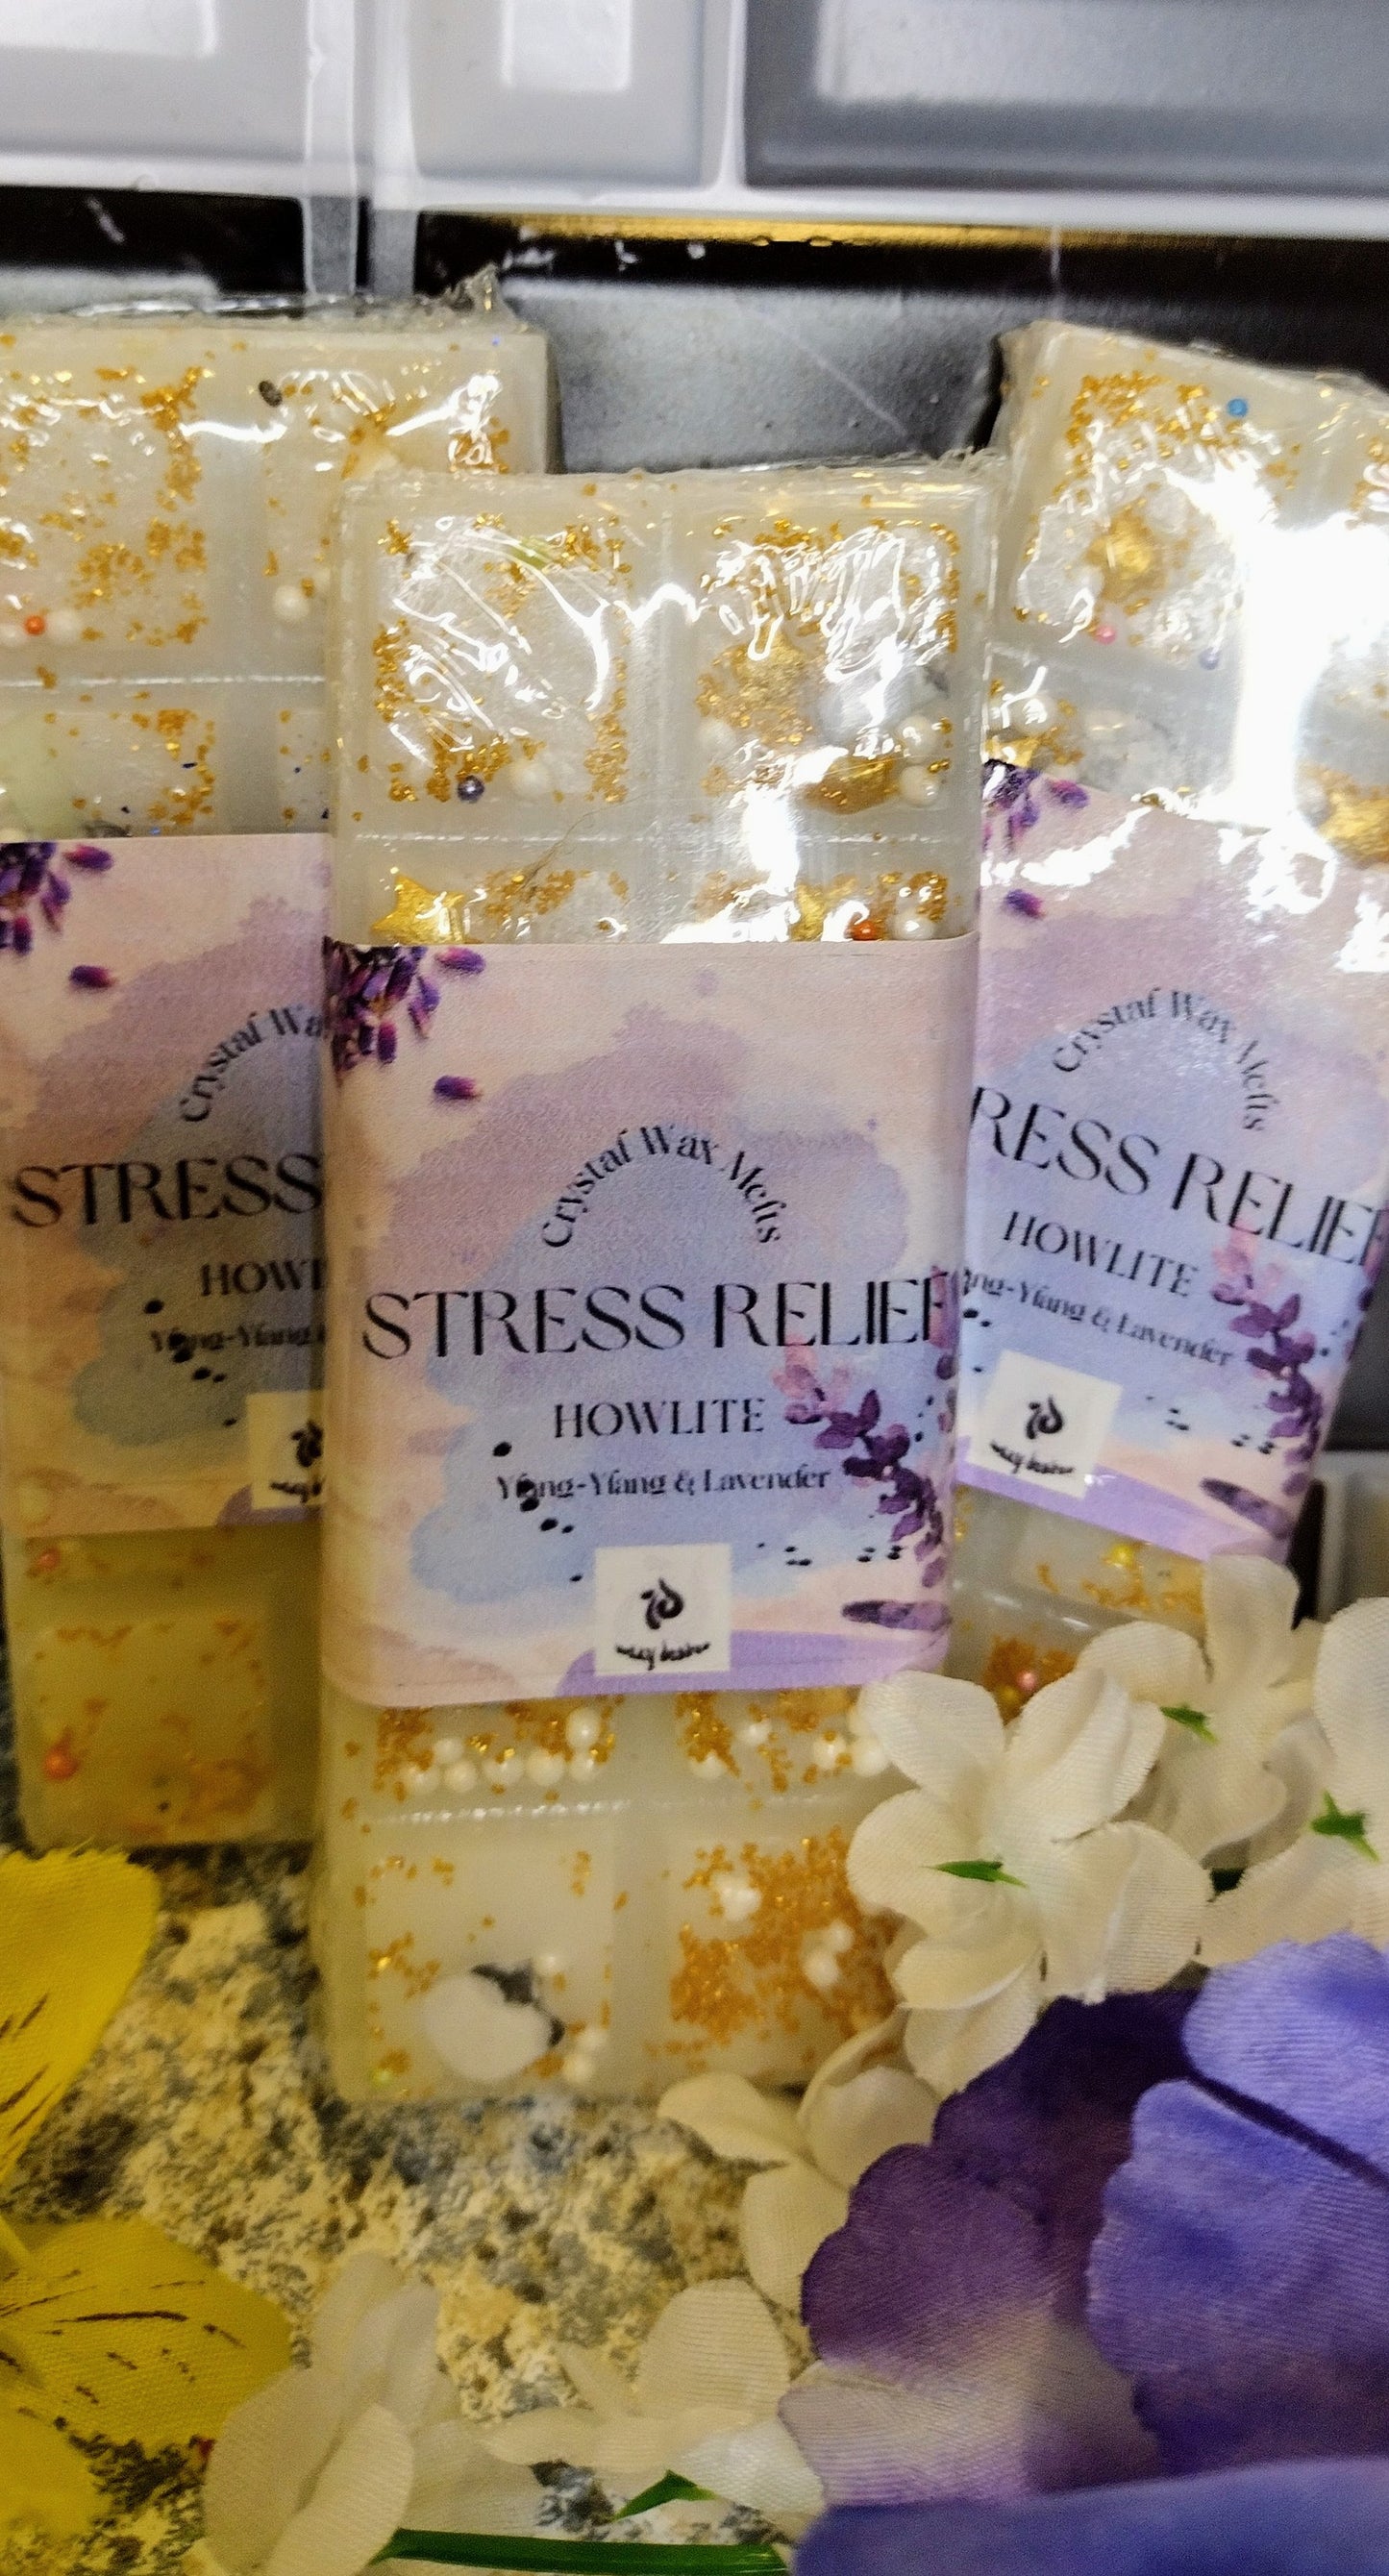 STRESS RELIEF - Crystal Wax Melts